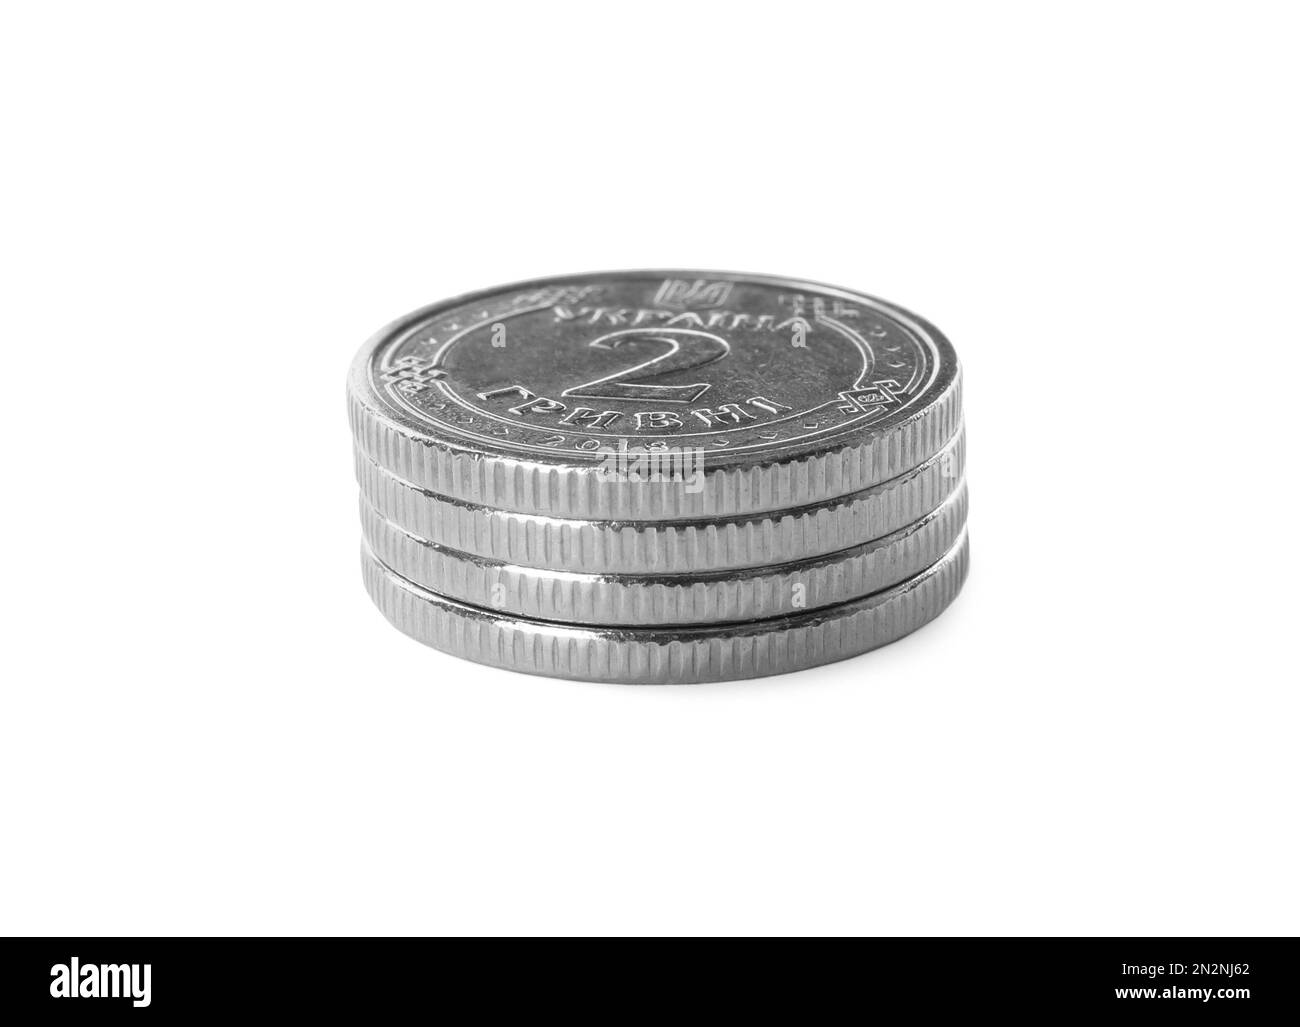 Stack of Ukrainian coins on white background. National currency Stock Photo